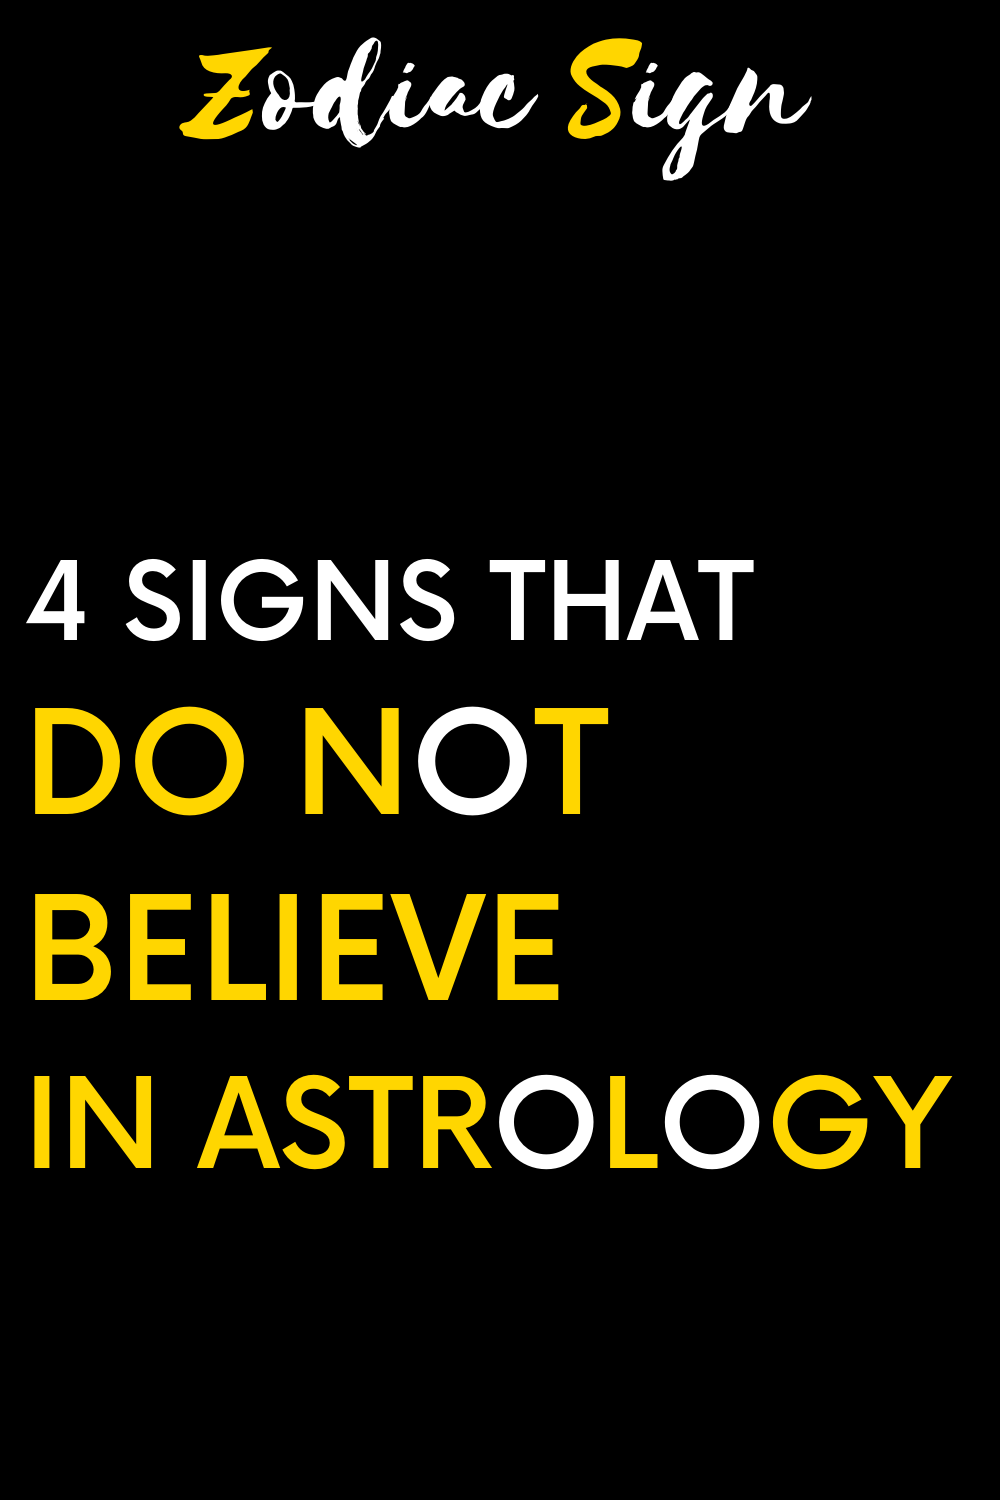 4 signs that do not believe in astrology